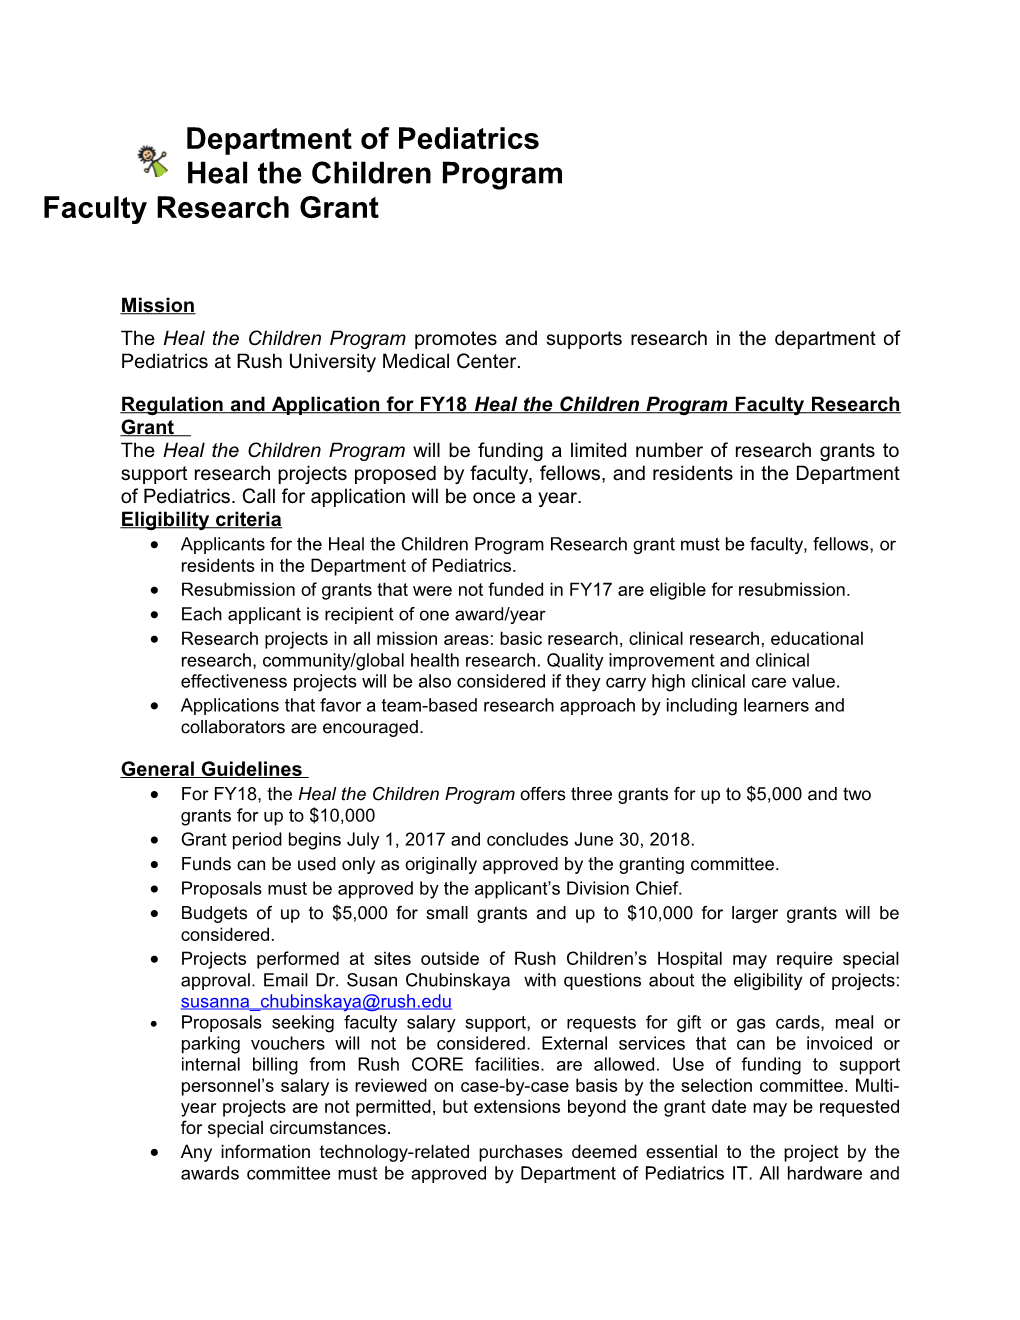 Regulation and Application for Fy18heal the Children Program Facultyresearchgrant